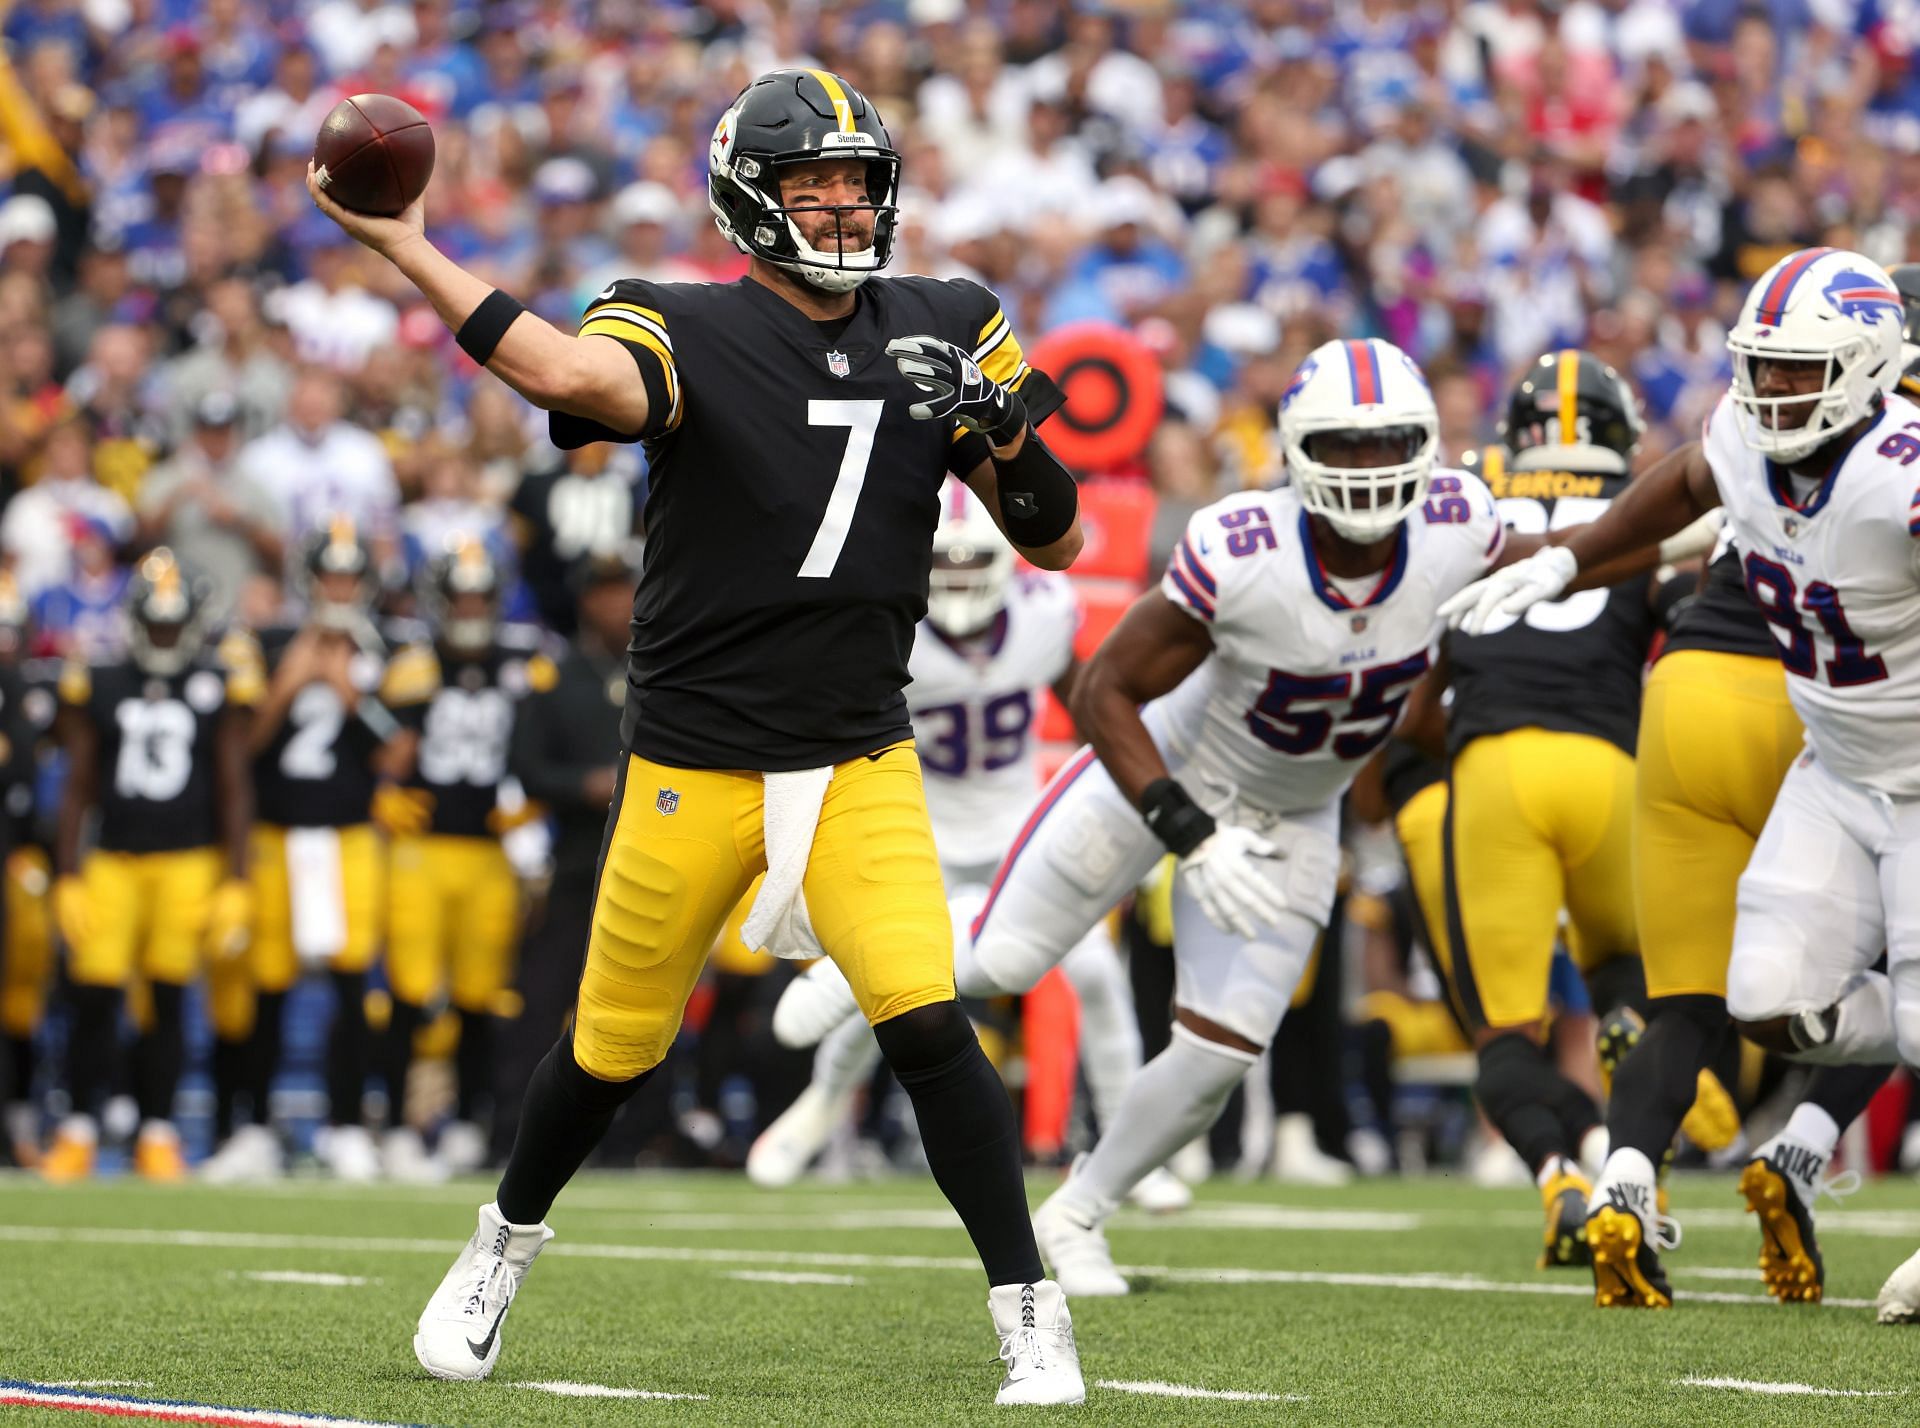 Roethlisberger during a September game against Buffalo (Photo: Getty)